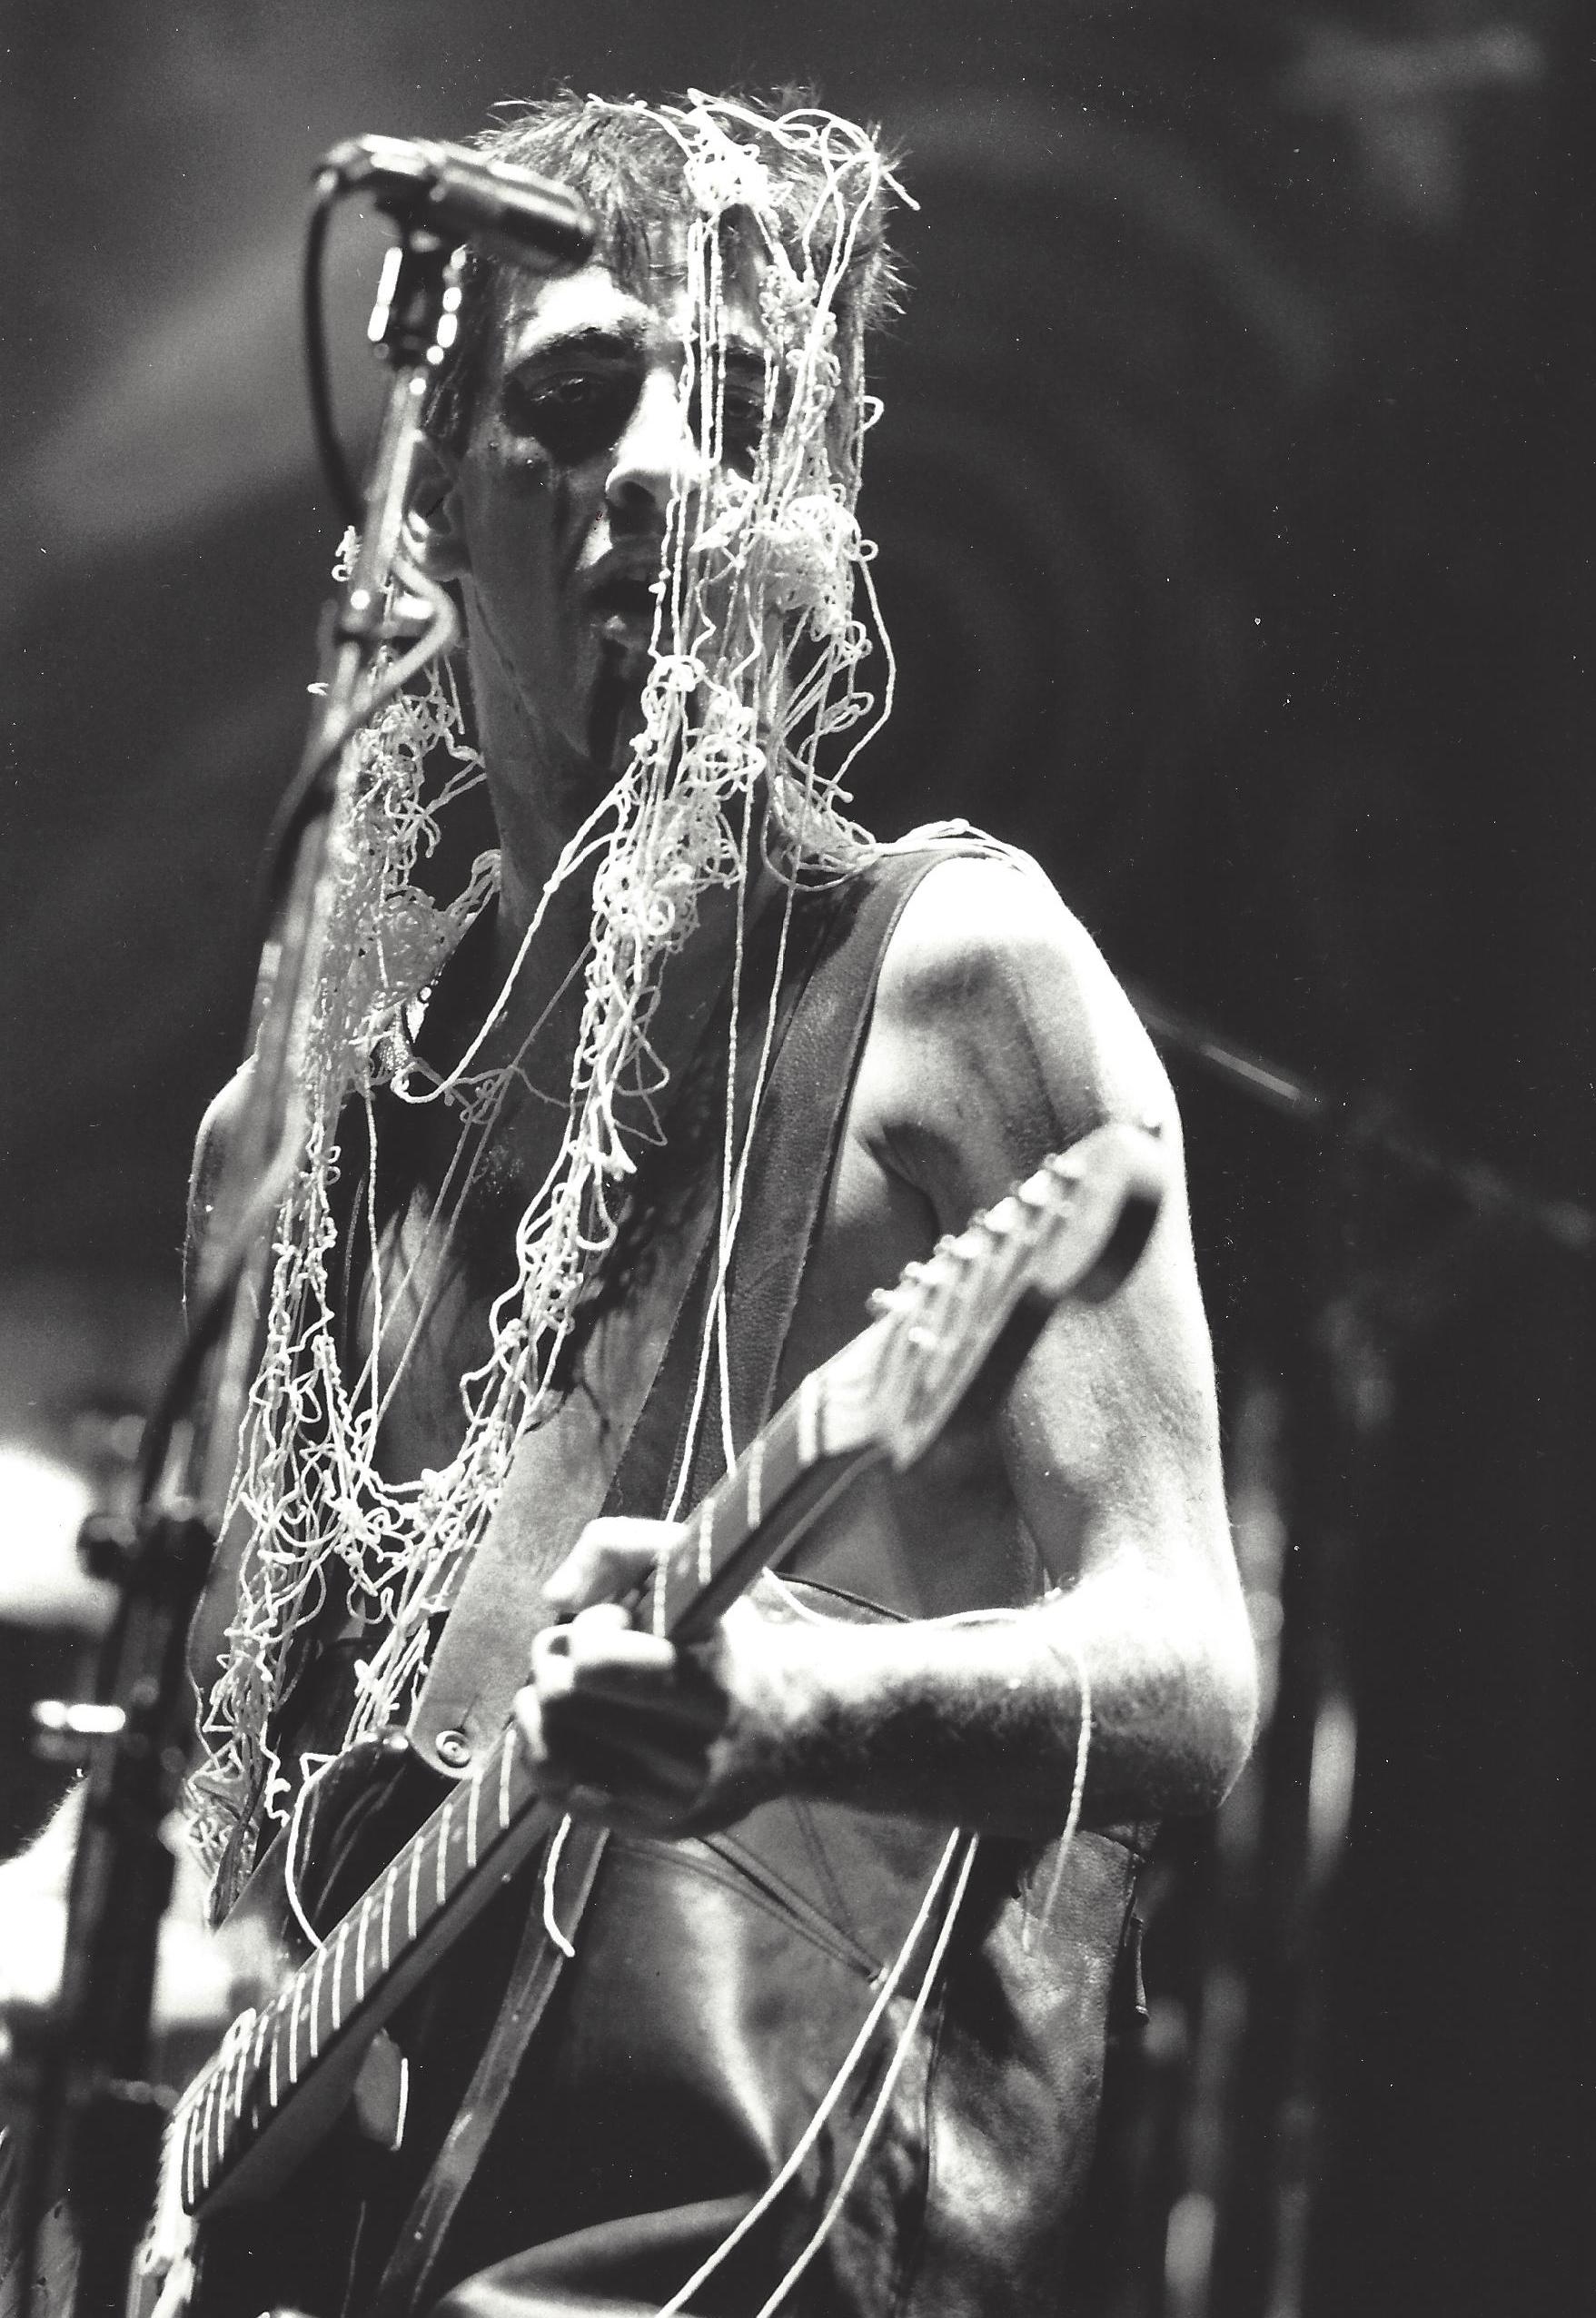 Gary Gershoff Portrait Photograph - John Frusciante Covered in Silly String Vintage Original Photograph